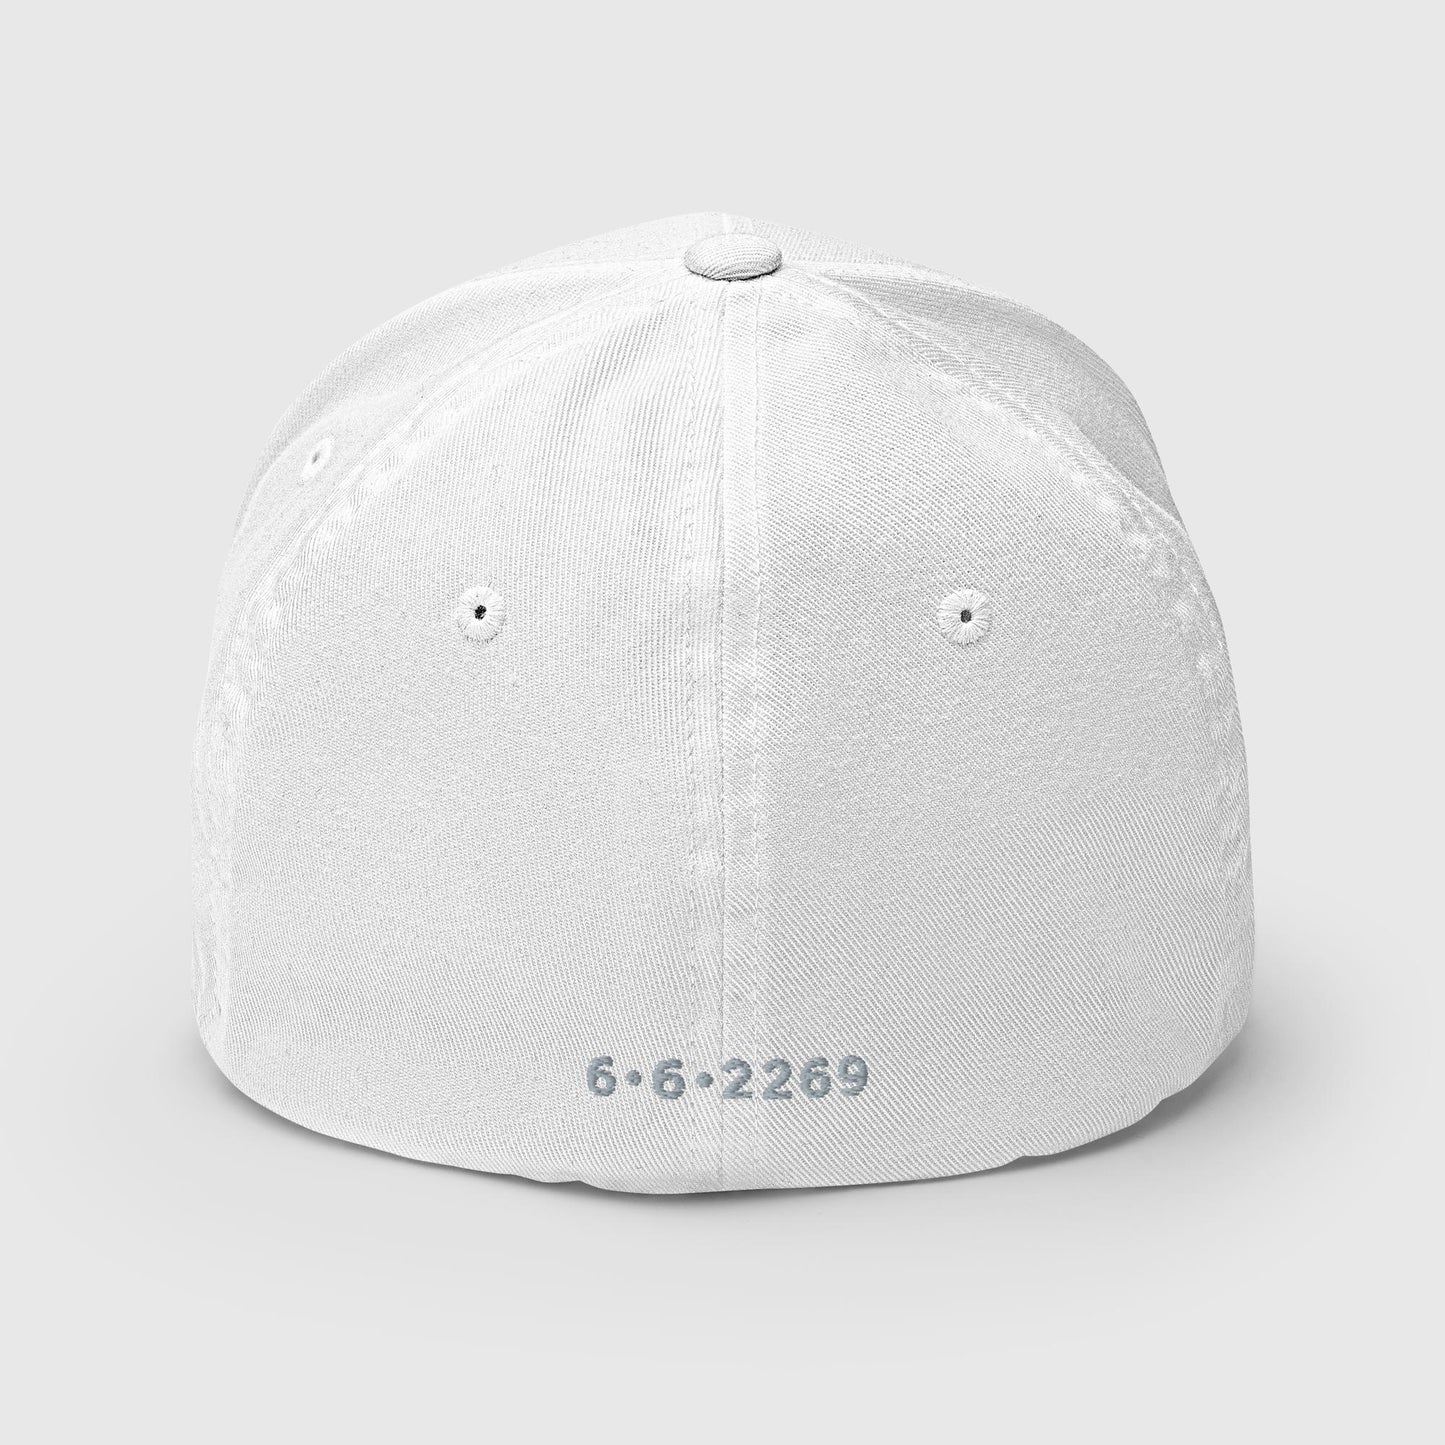 White fitted baseball hat with subtle embroidery front and back